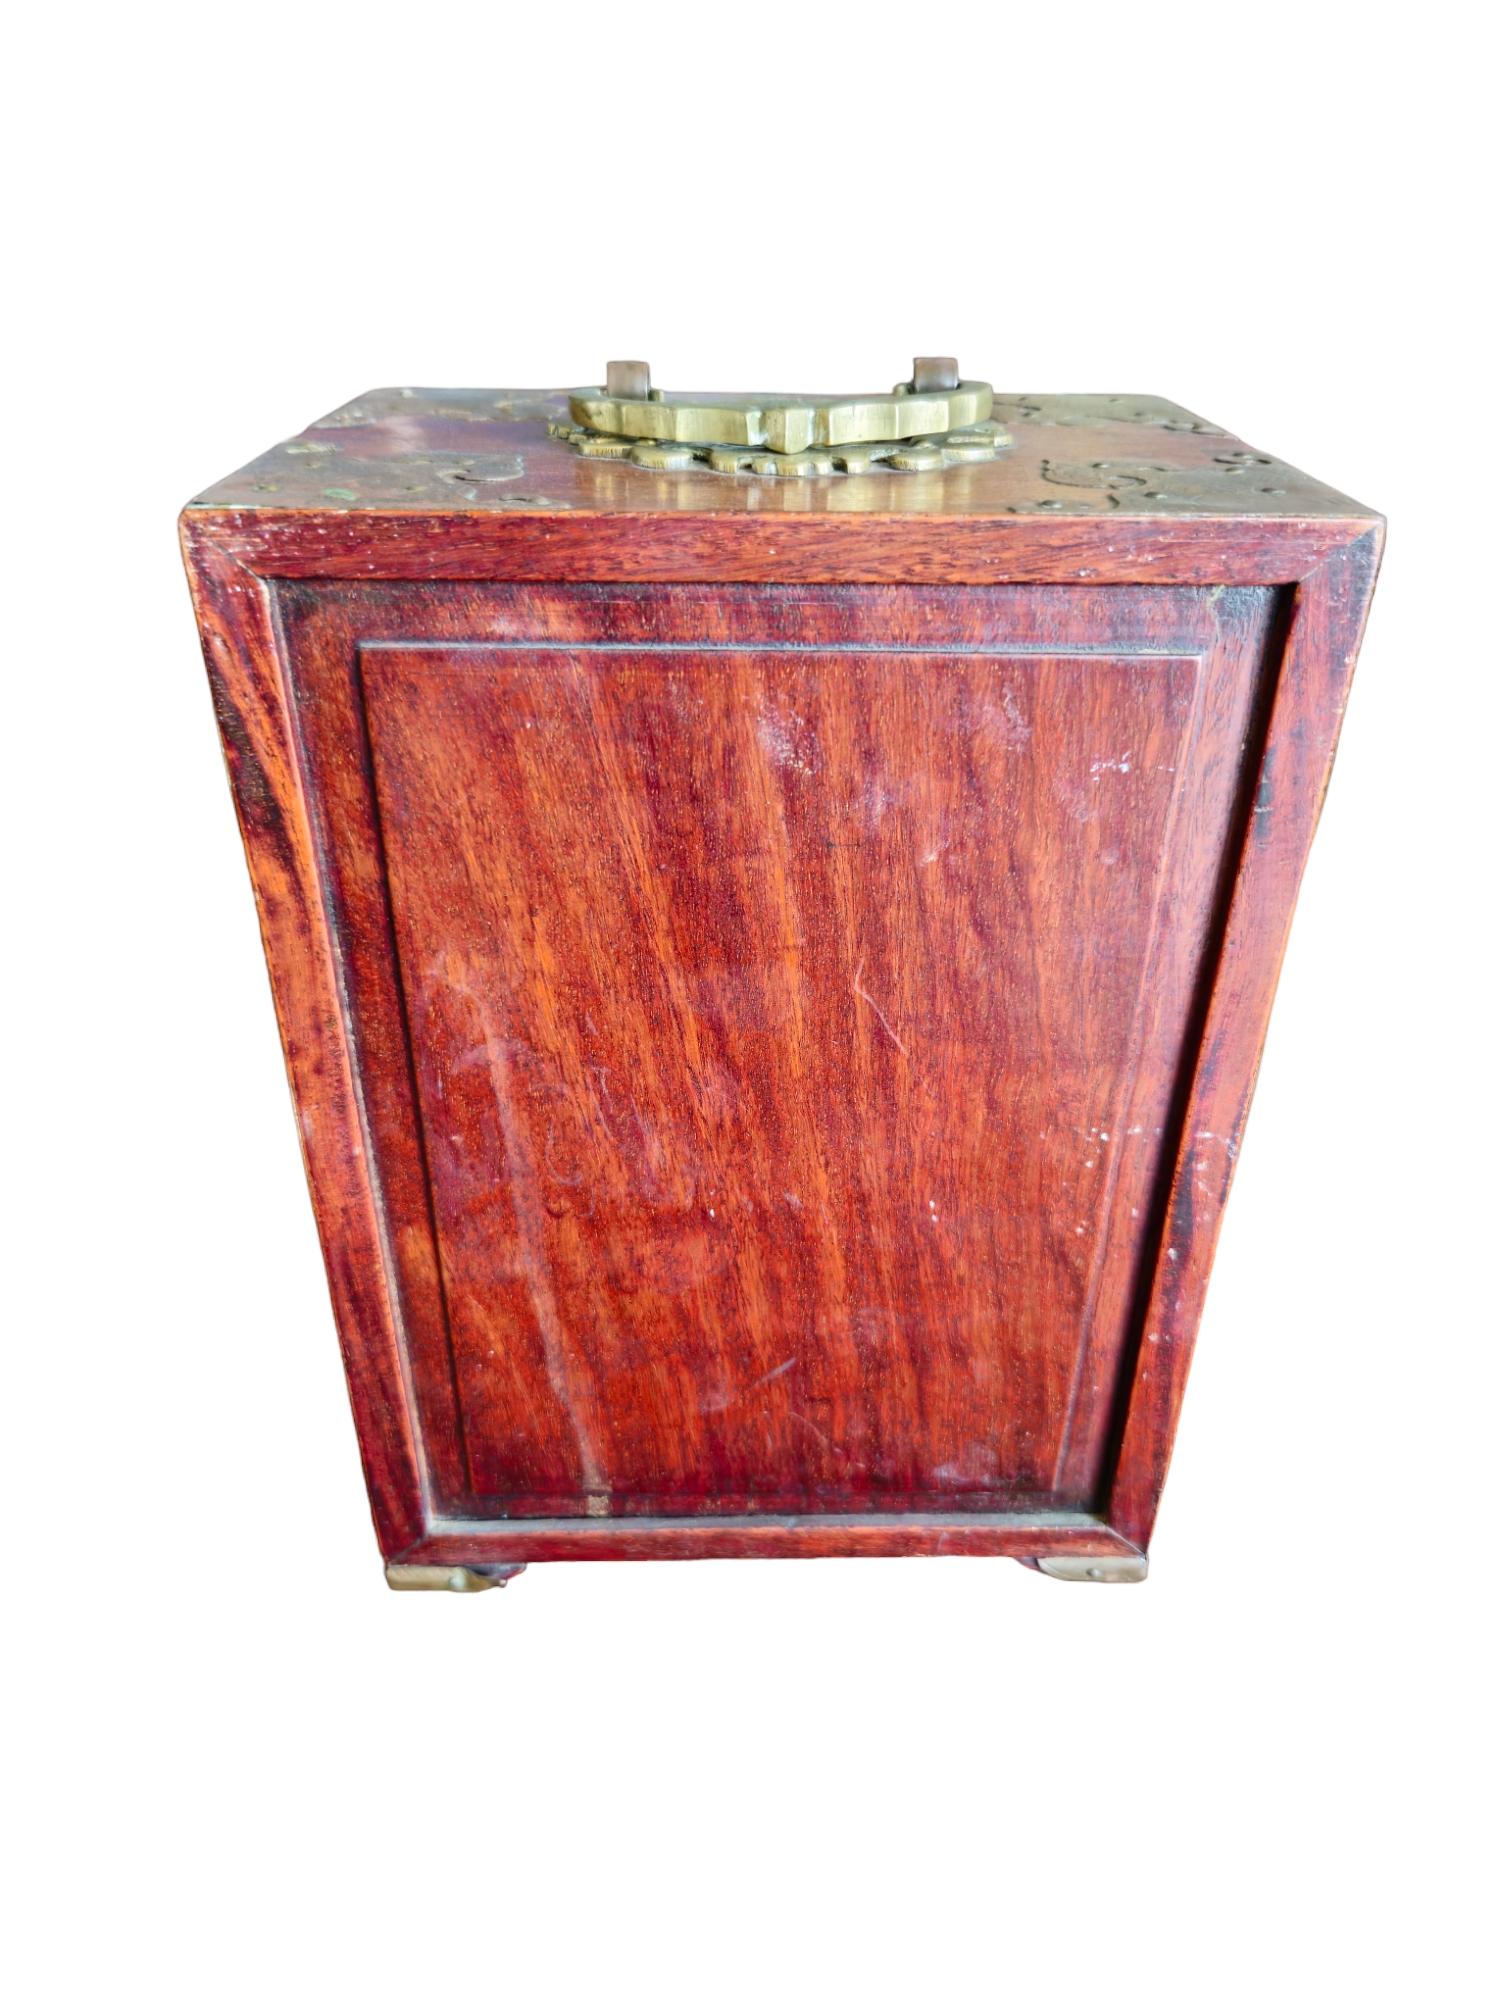 Hand-Crafted Antique Chinese Rosewood and Bronze mounted Jewelry box 